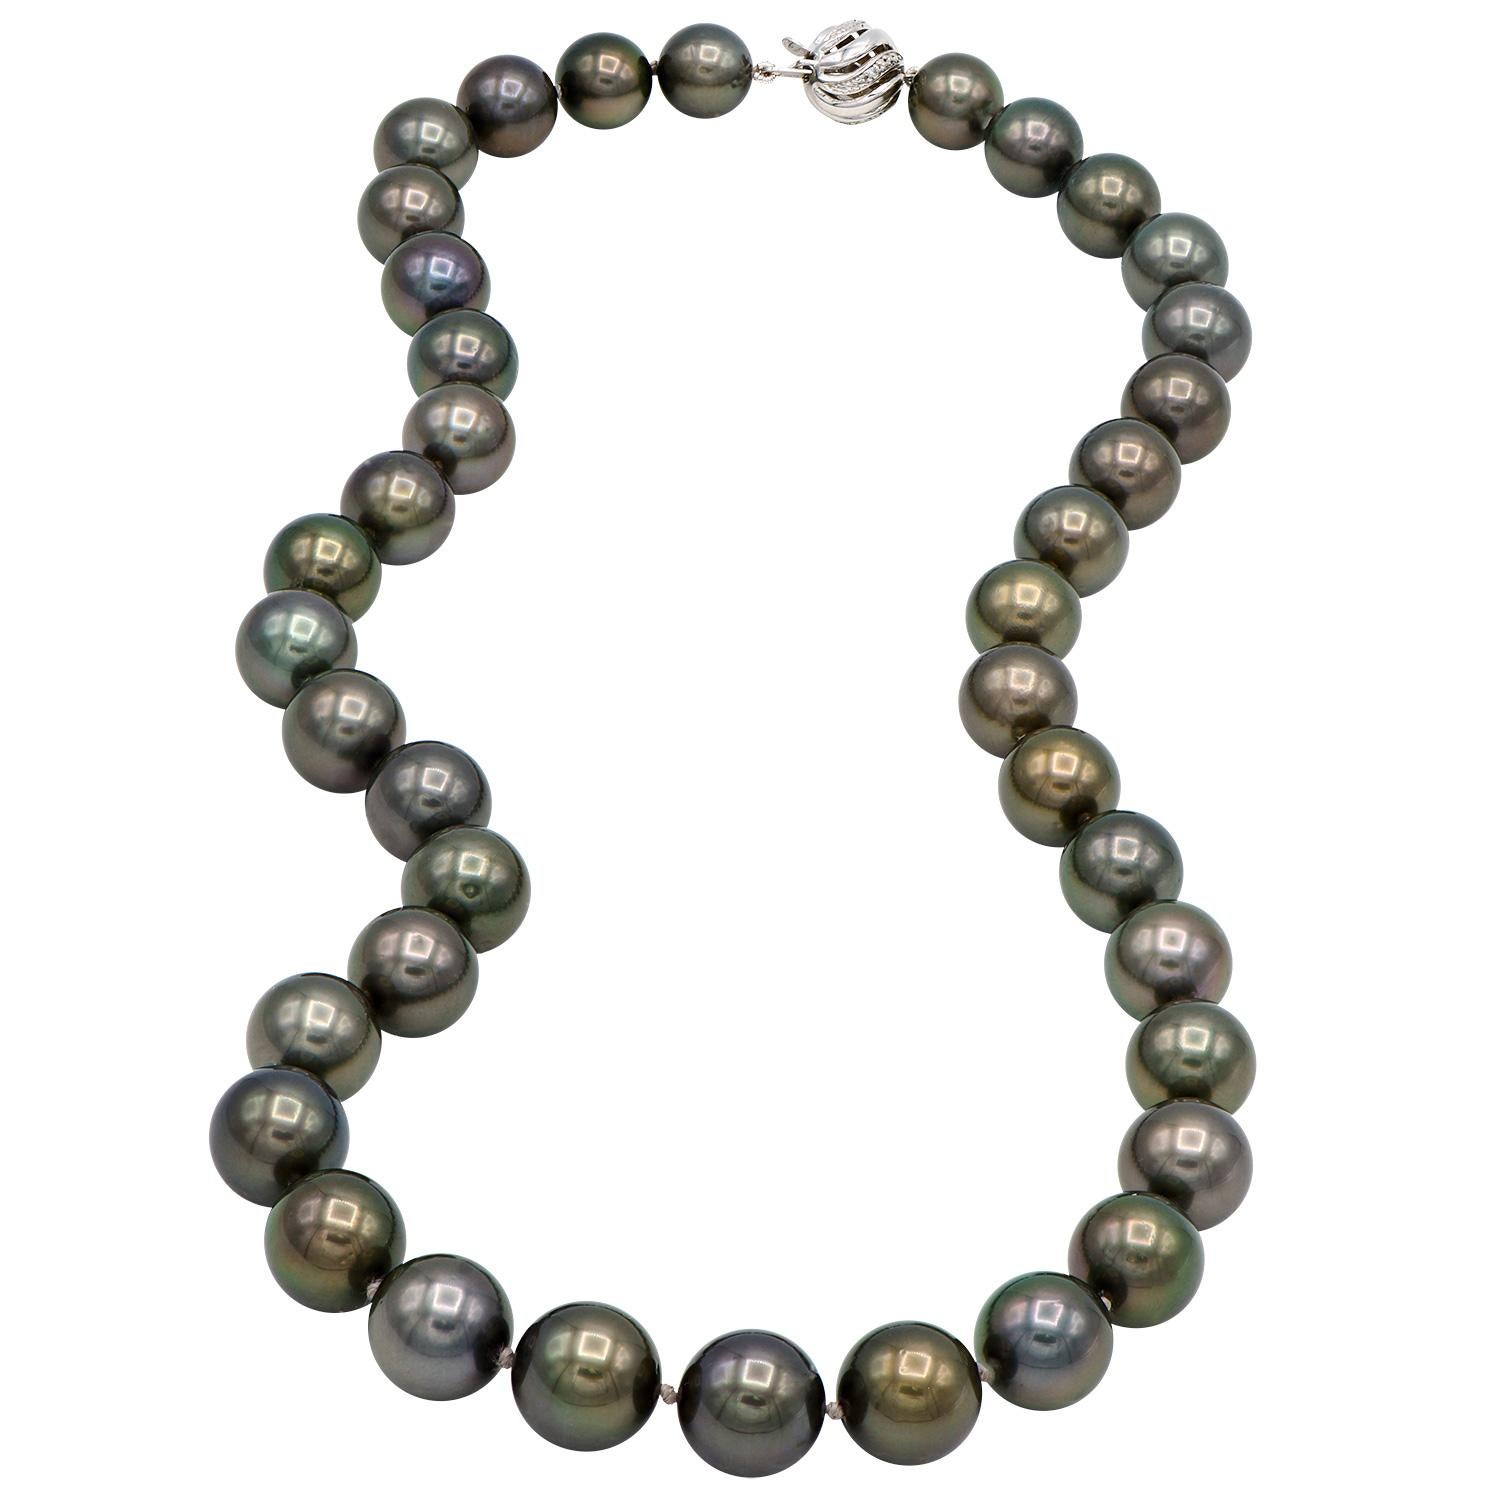 This beautiful black Tahitian pearl necklace is made from 39 pearls sizes 9.2-11.6mm. These darker black pearls make an 18 inch strand which is expertly strung with a double know in between each pearl and is closed with a 14 karat white gold ball